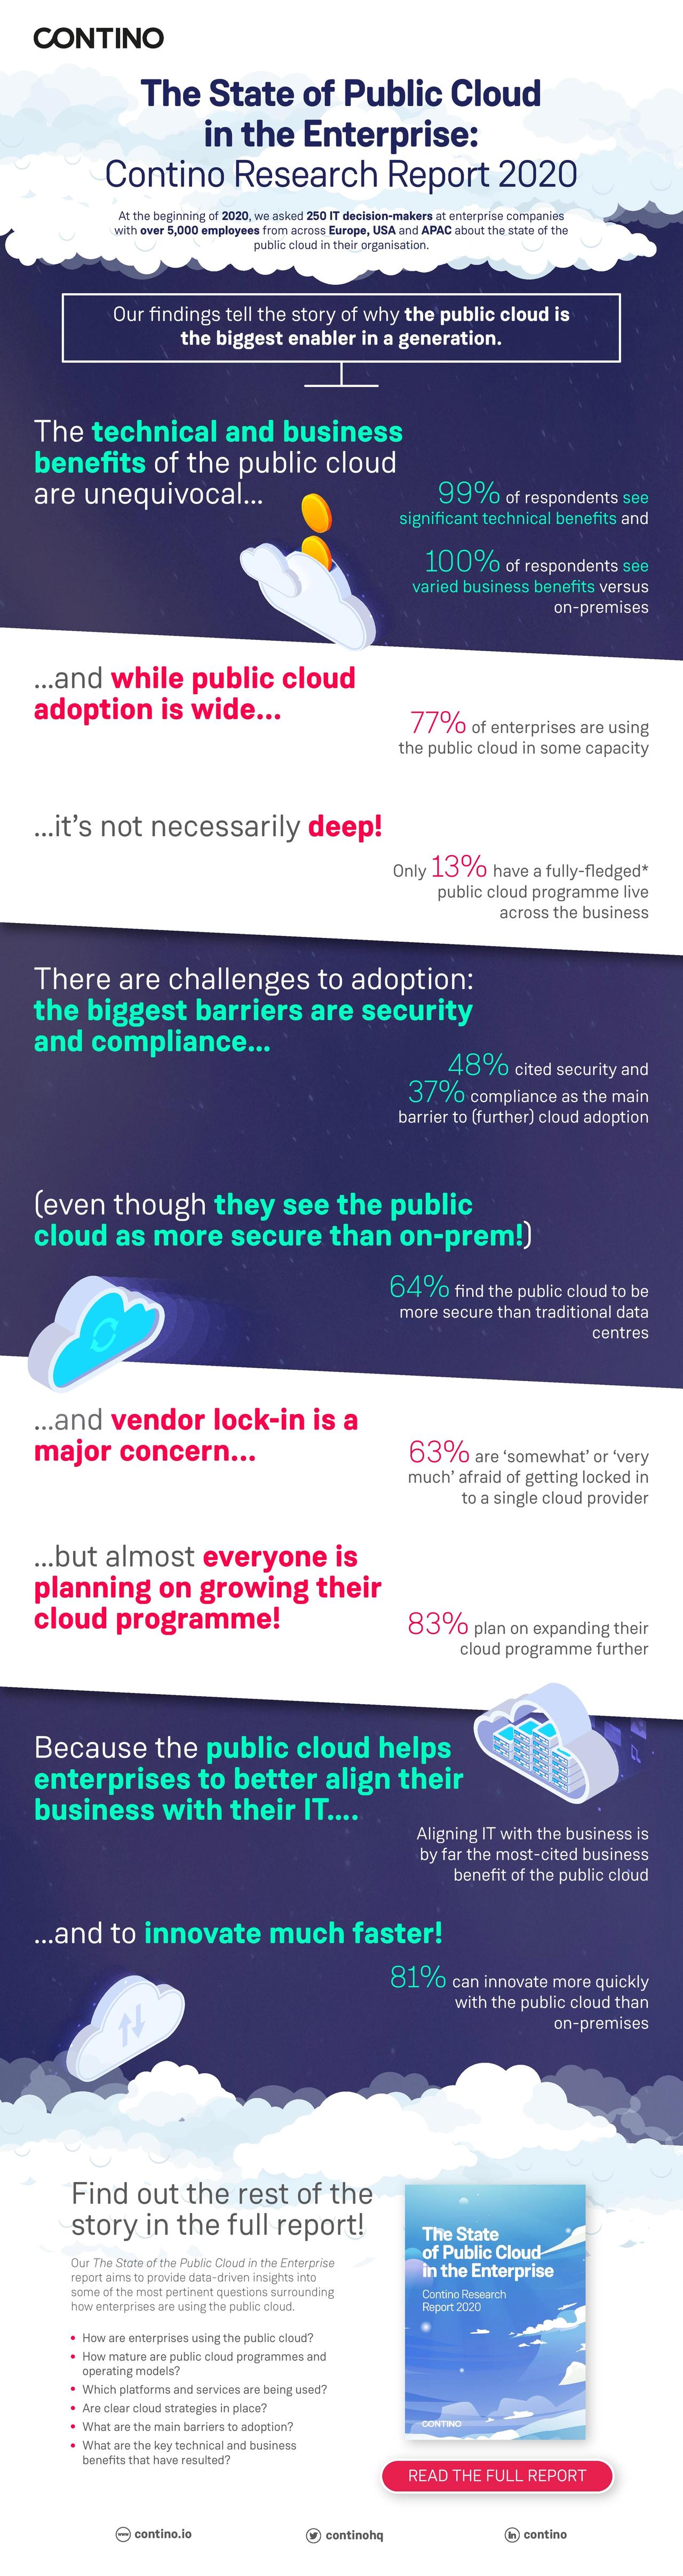 The State of the Public Cloud in the Enterprise